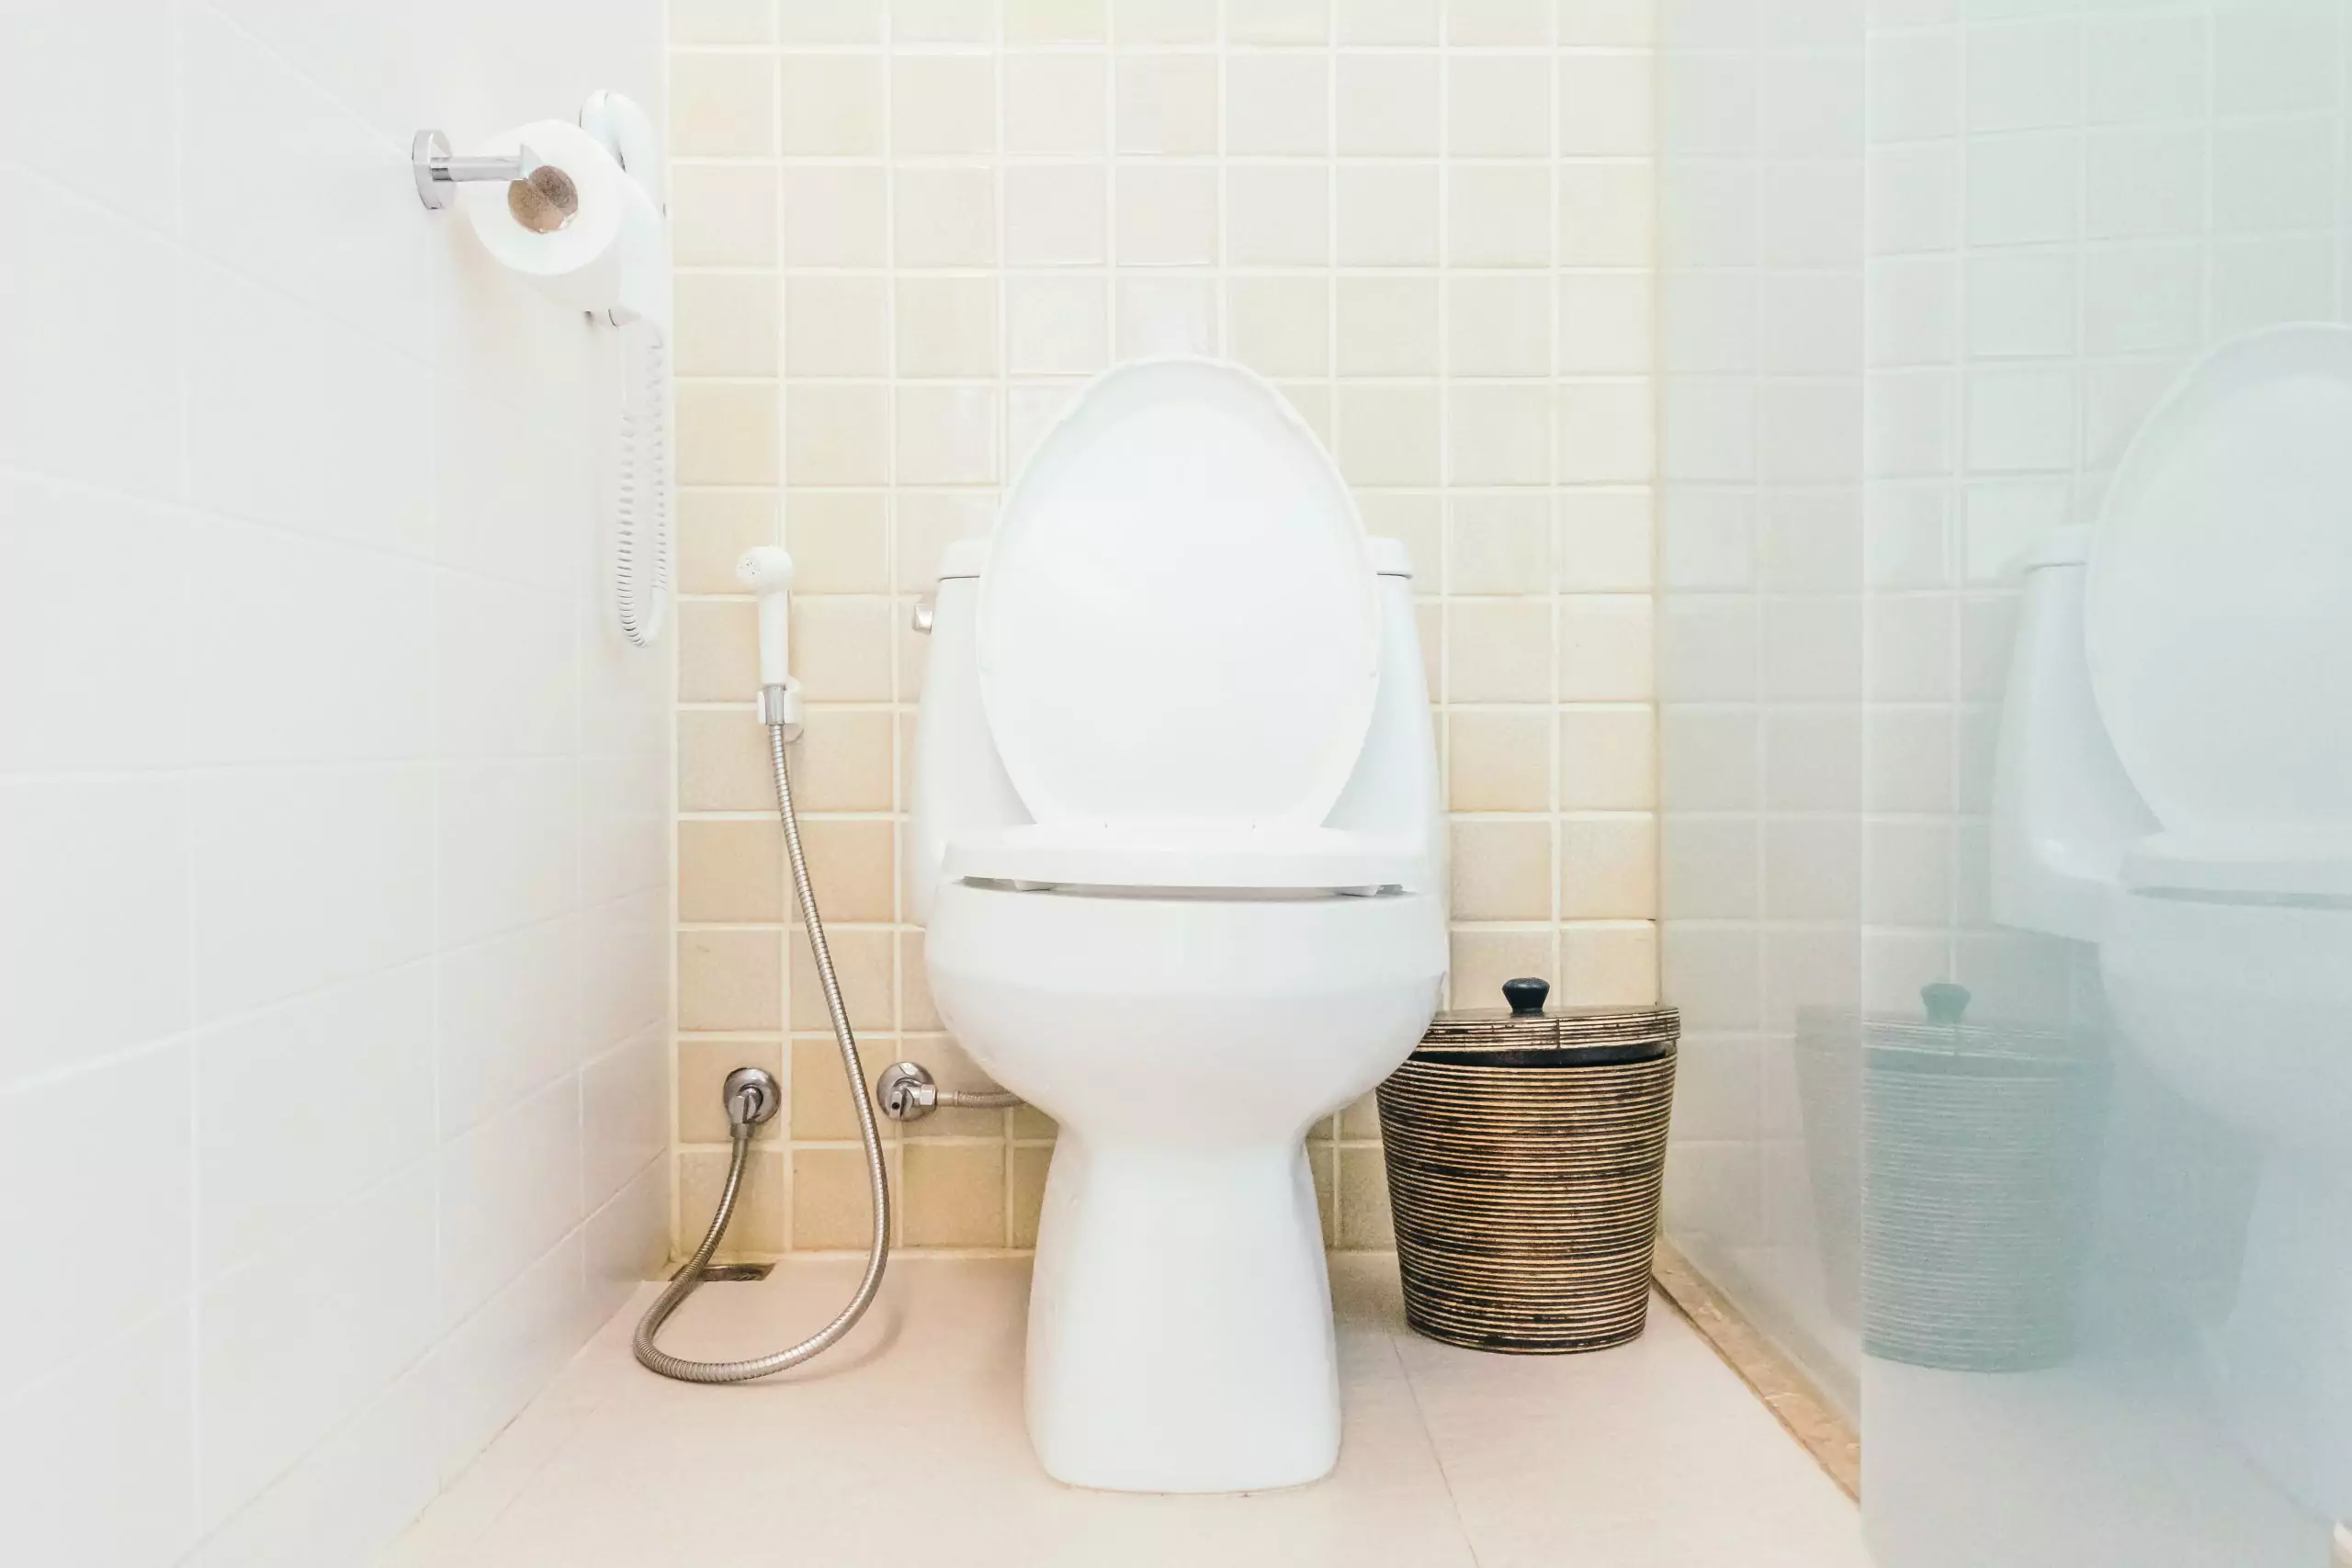 Toilet in bathroom for urinary or urination issues